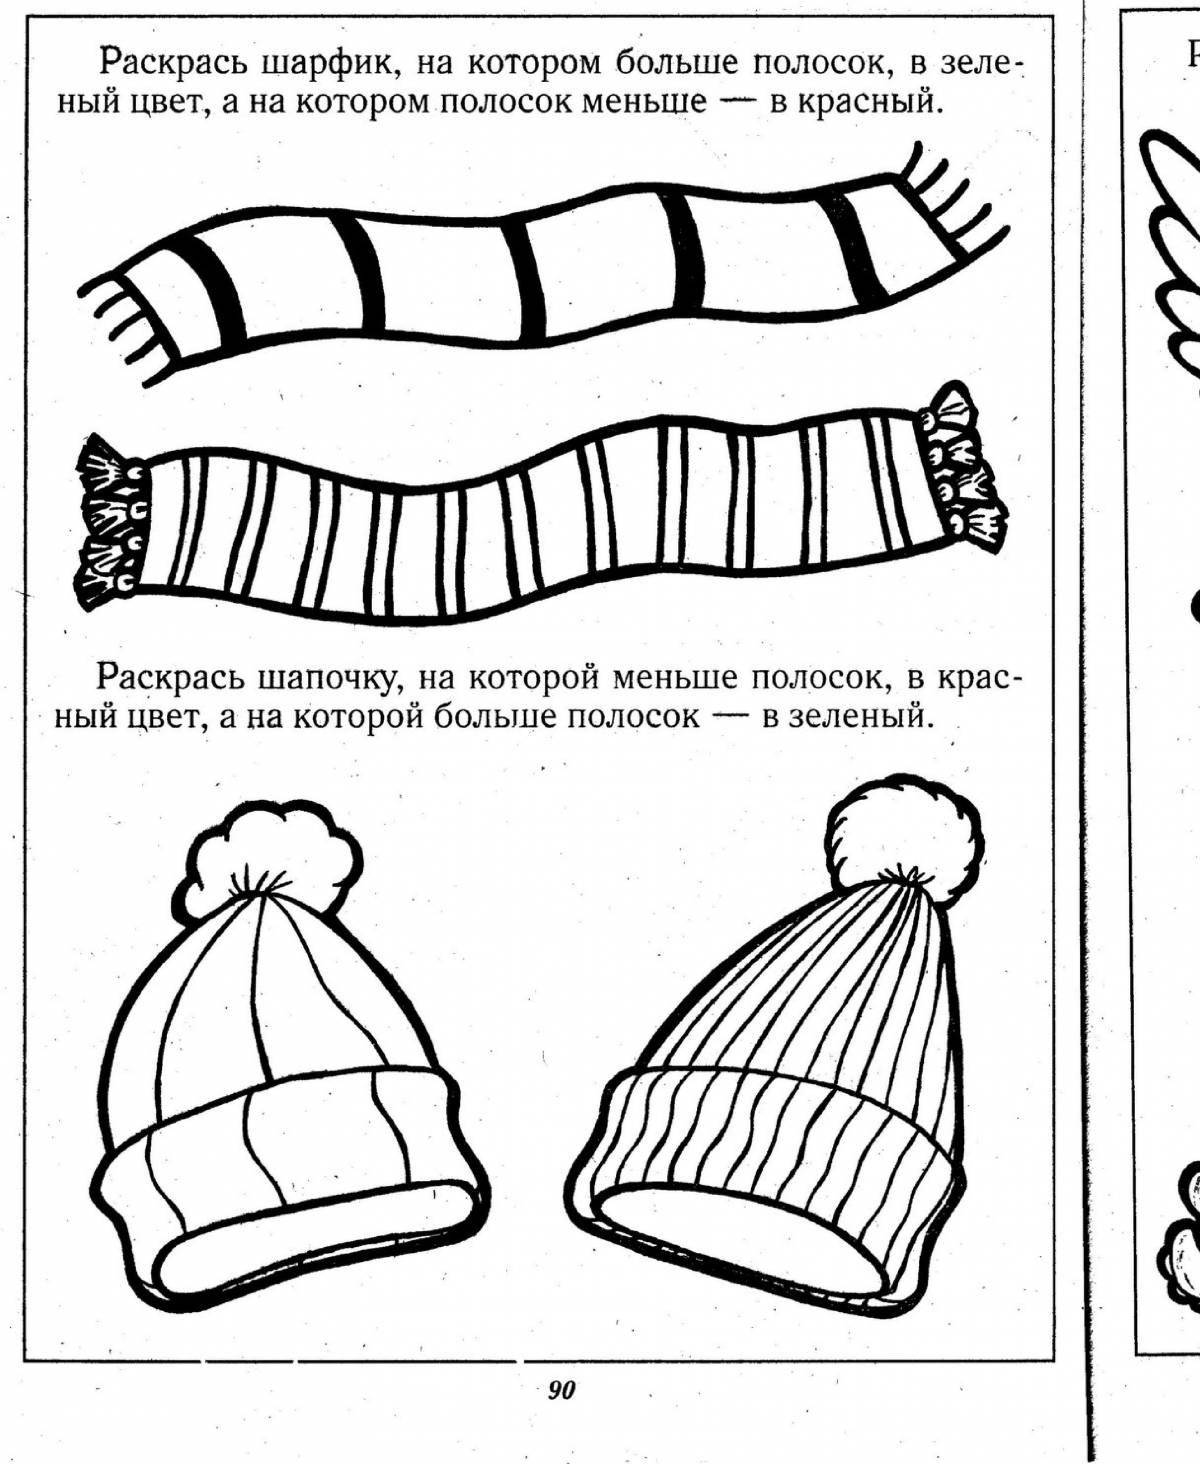 Colouring funny scarf for children 3-4 years old